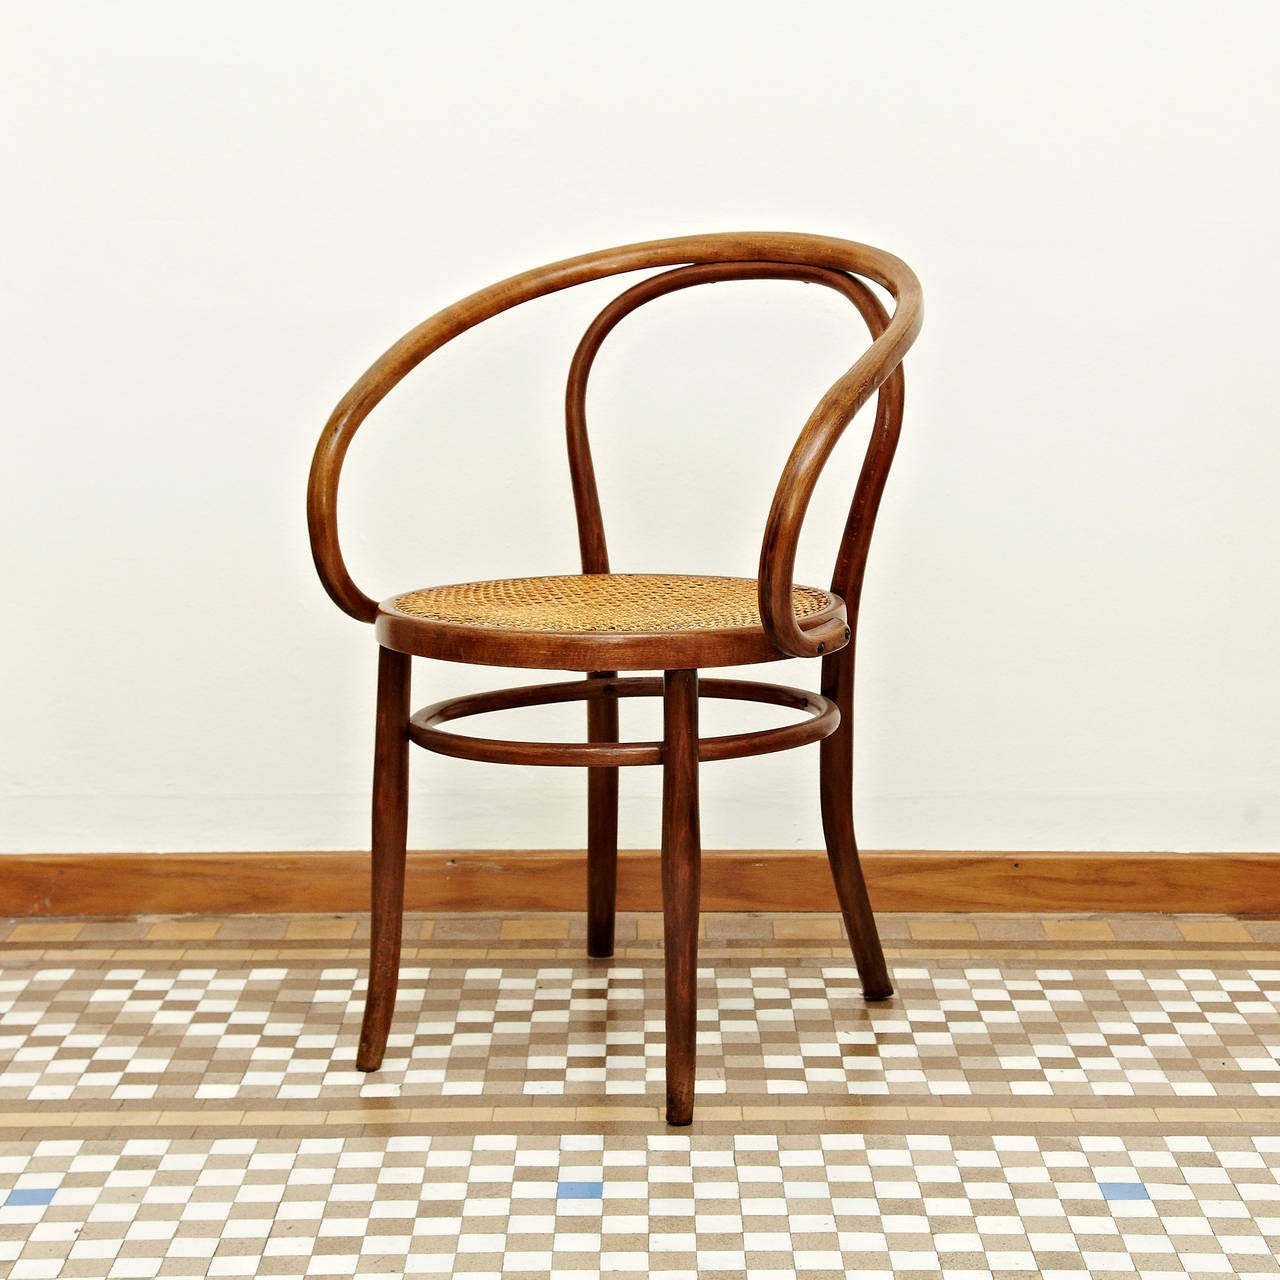 Mid-20th Century Thonet 209 Armchair by Auguste Thonet for Thonet, circa 1900